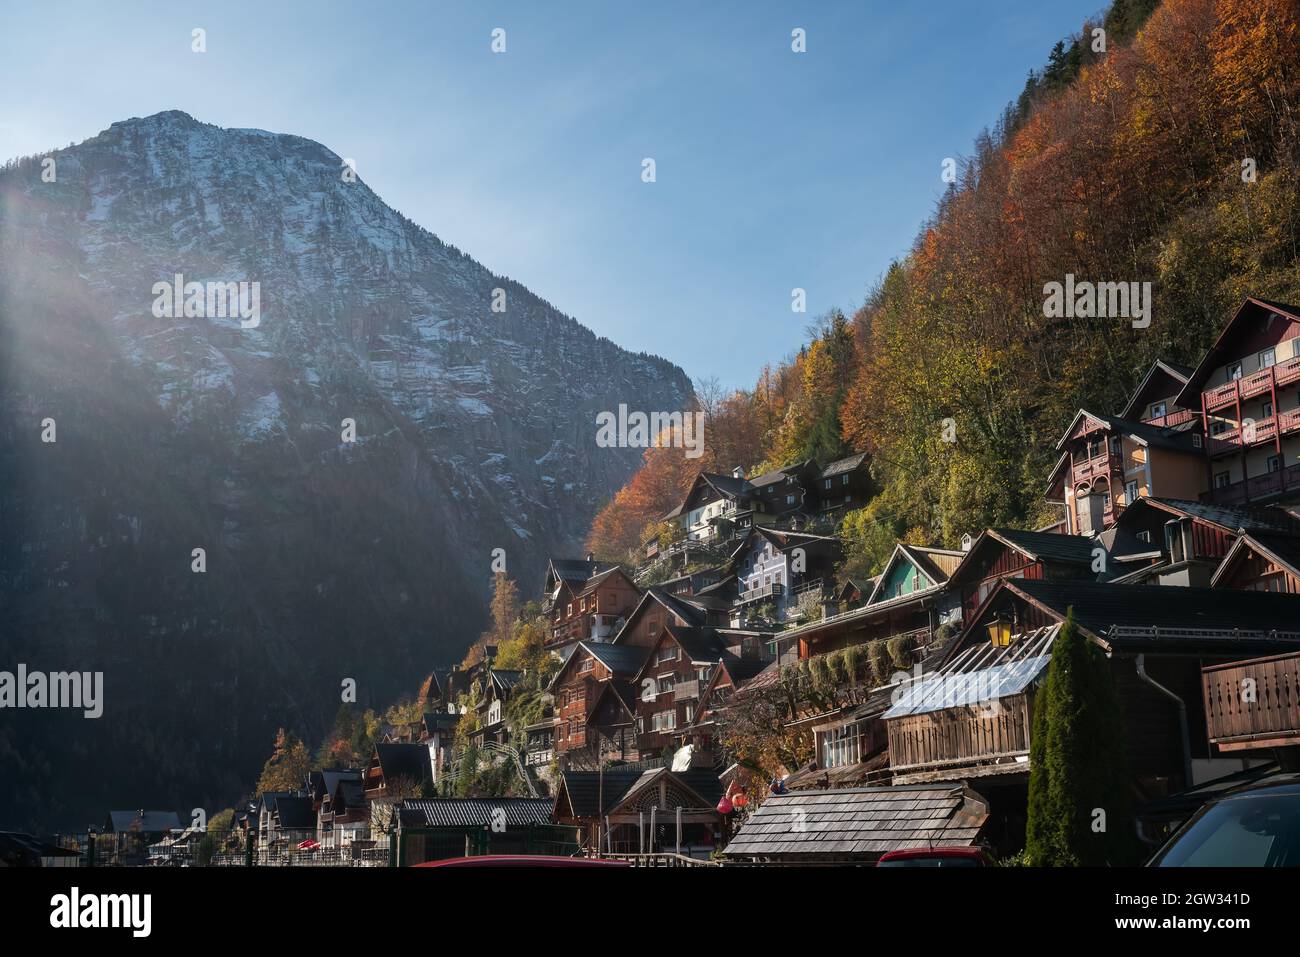 Wooden houses on the hill at Seestrasse with alps mountains on background - Hallstatt, Austria Stock Photo